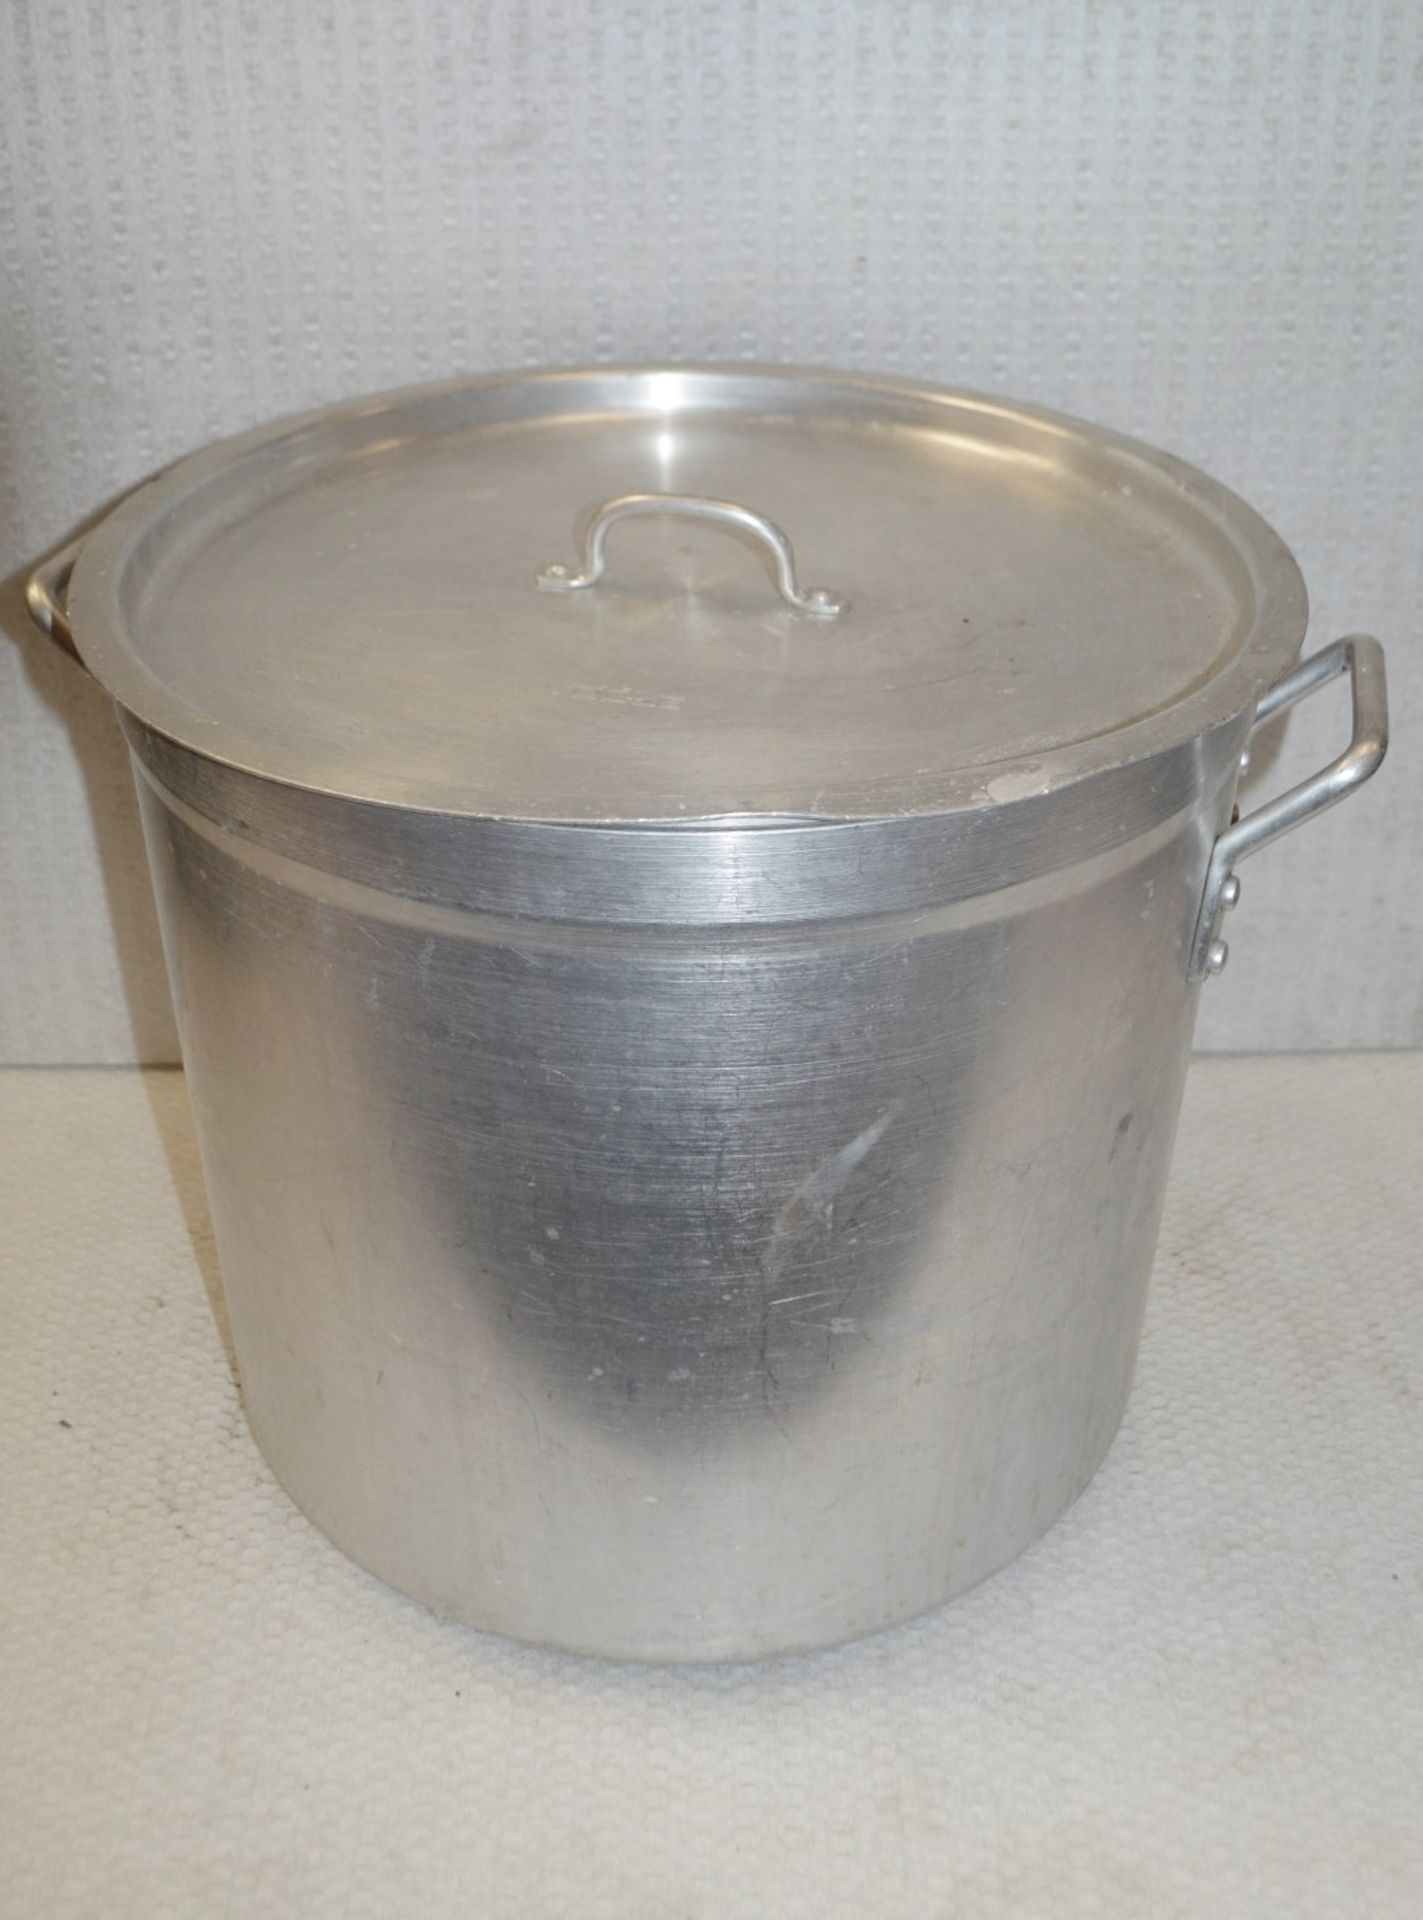 1 x Large Stainless Steel Cooking Pan With Lid - Dimensions: L40 x W40 x D37cm - Recently Removed - Image 2 of 2